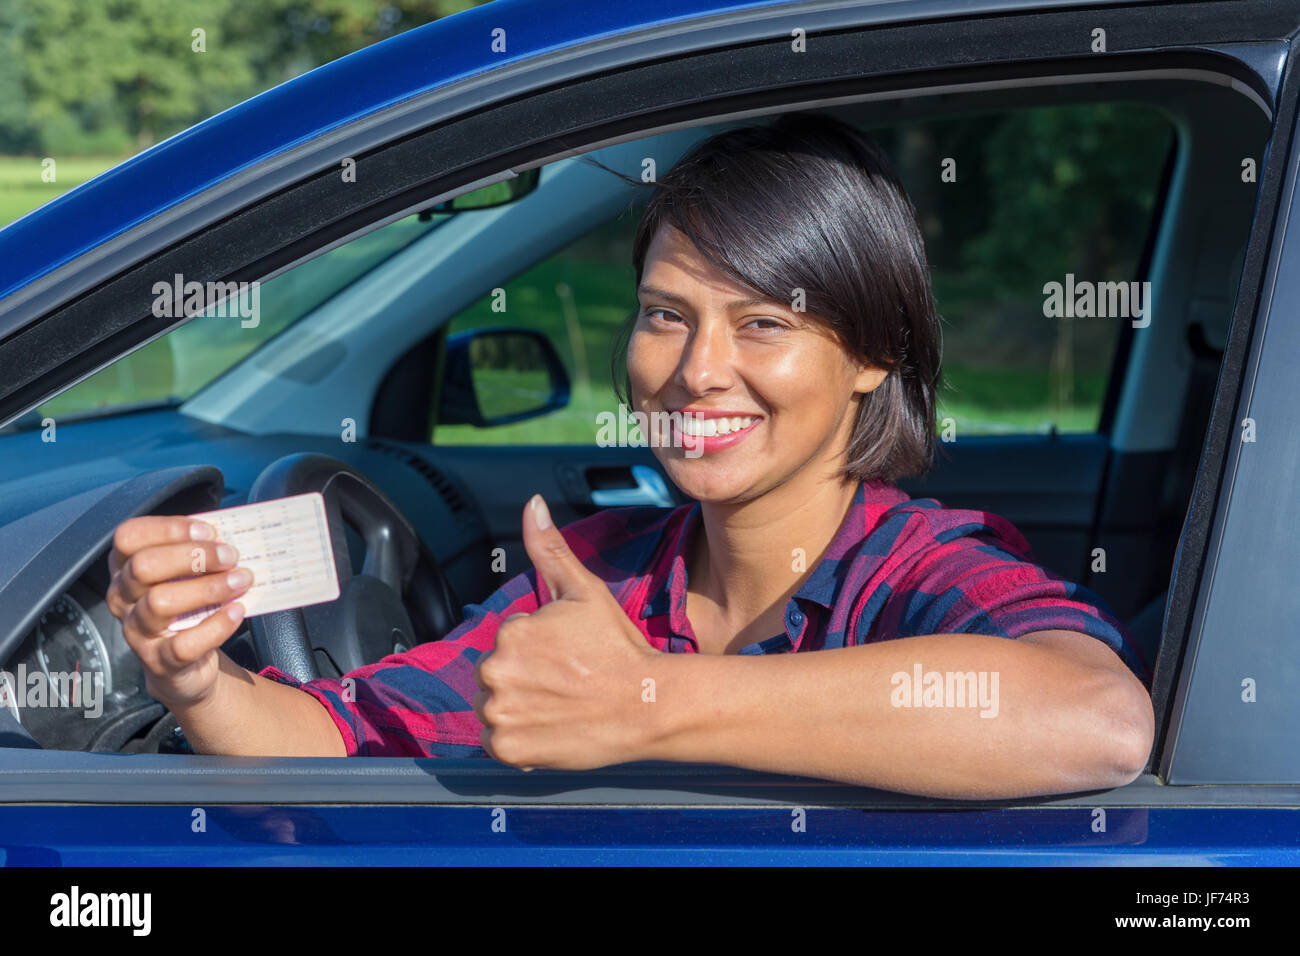 Young woman showing driving license in car Stock Photo